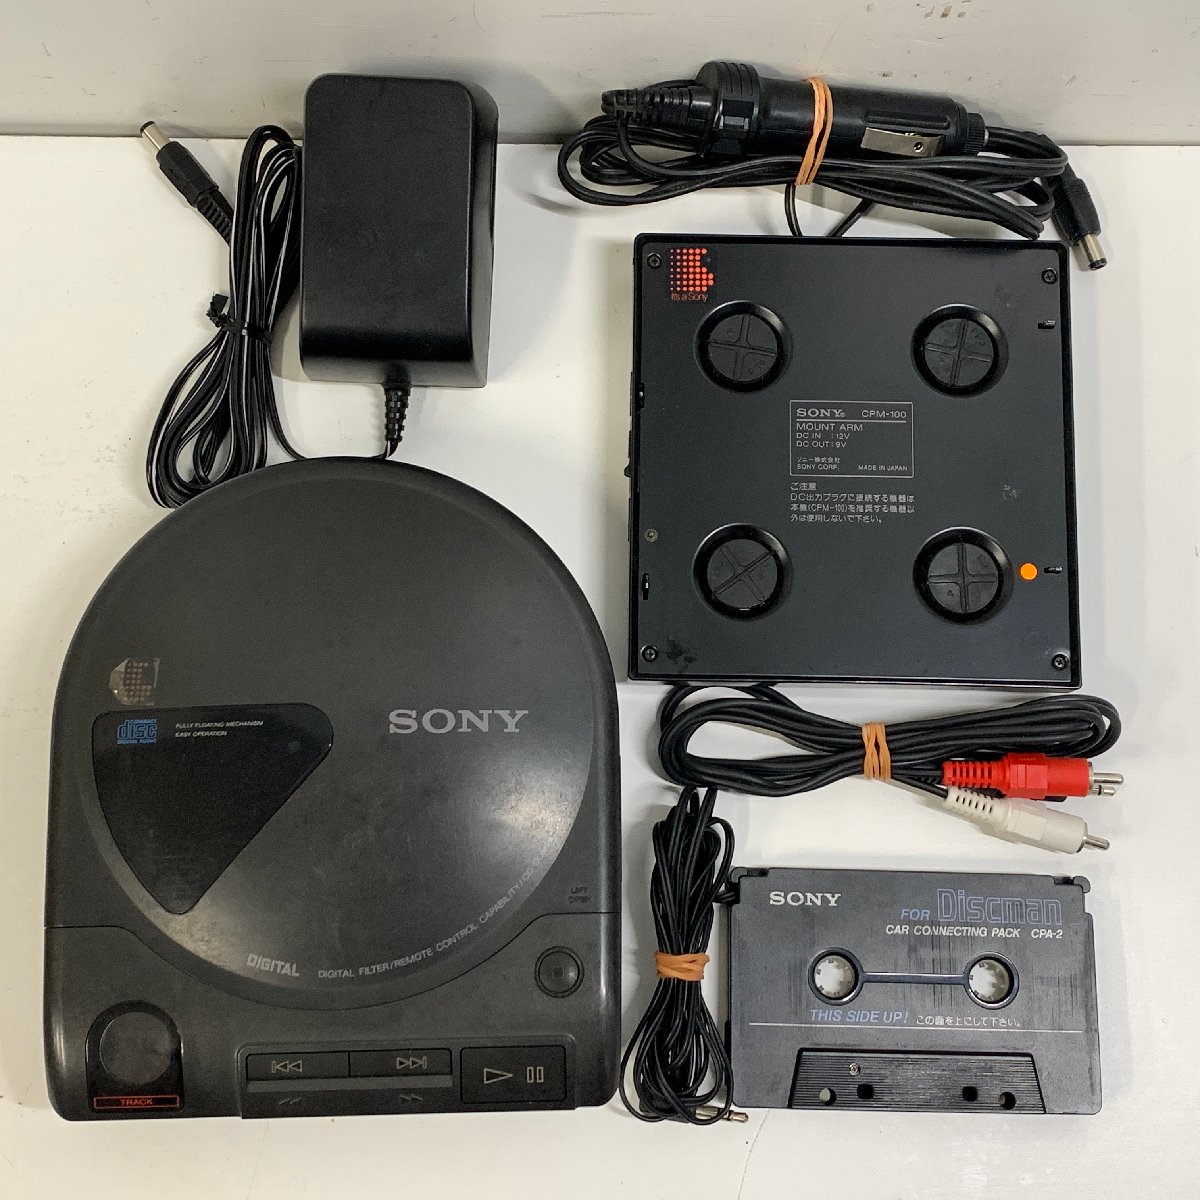 SONY D-600 Discman ソニー ディスクマン 車載アダプター MOUNT ARM CPM-100／CAR CONNECTING PACK CPA-02